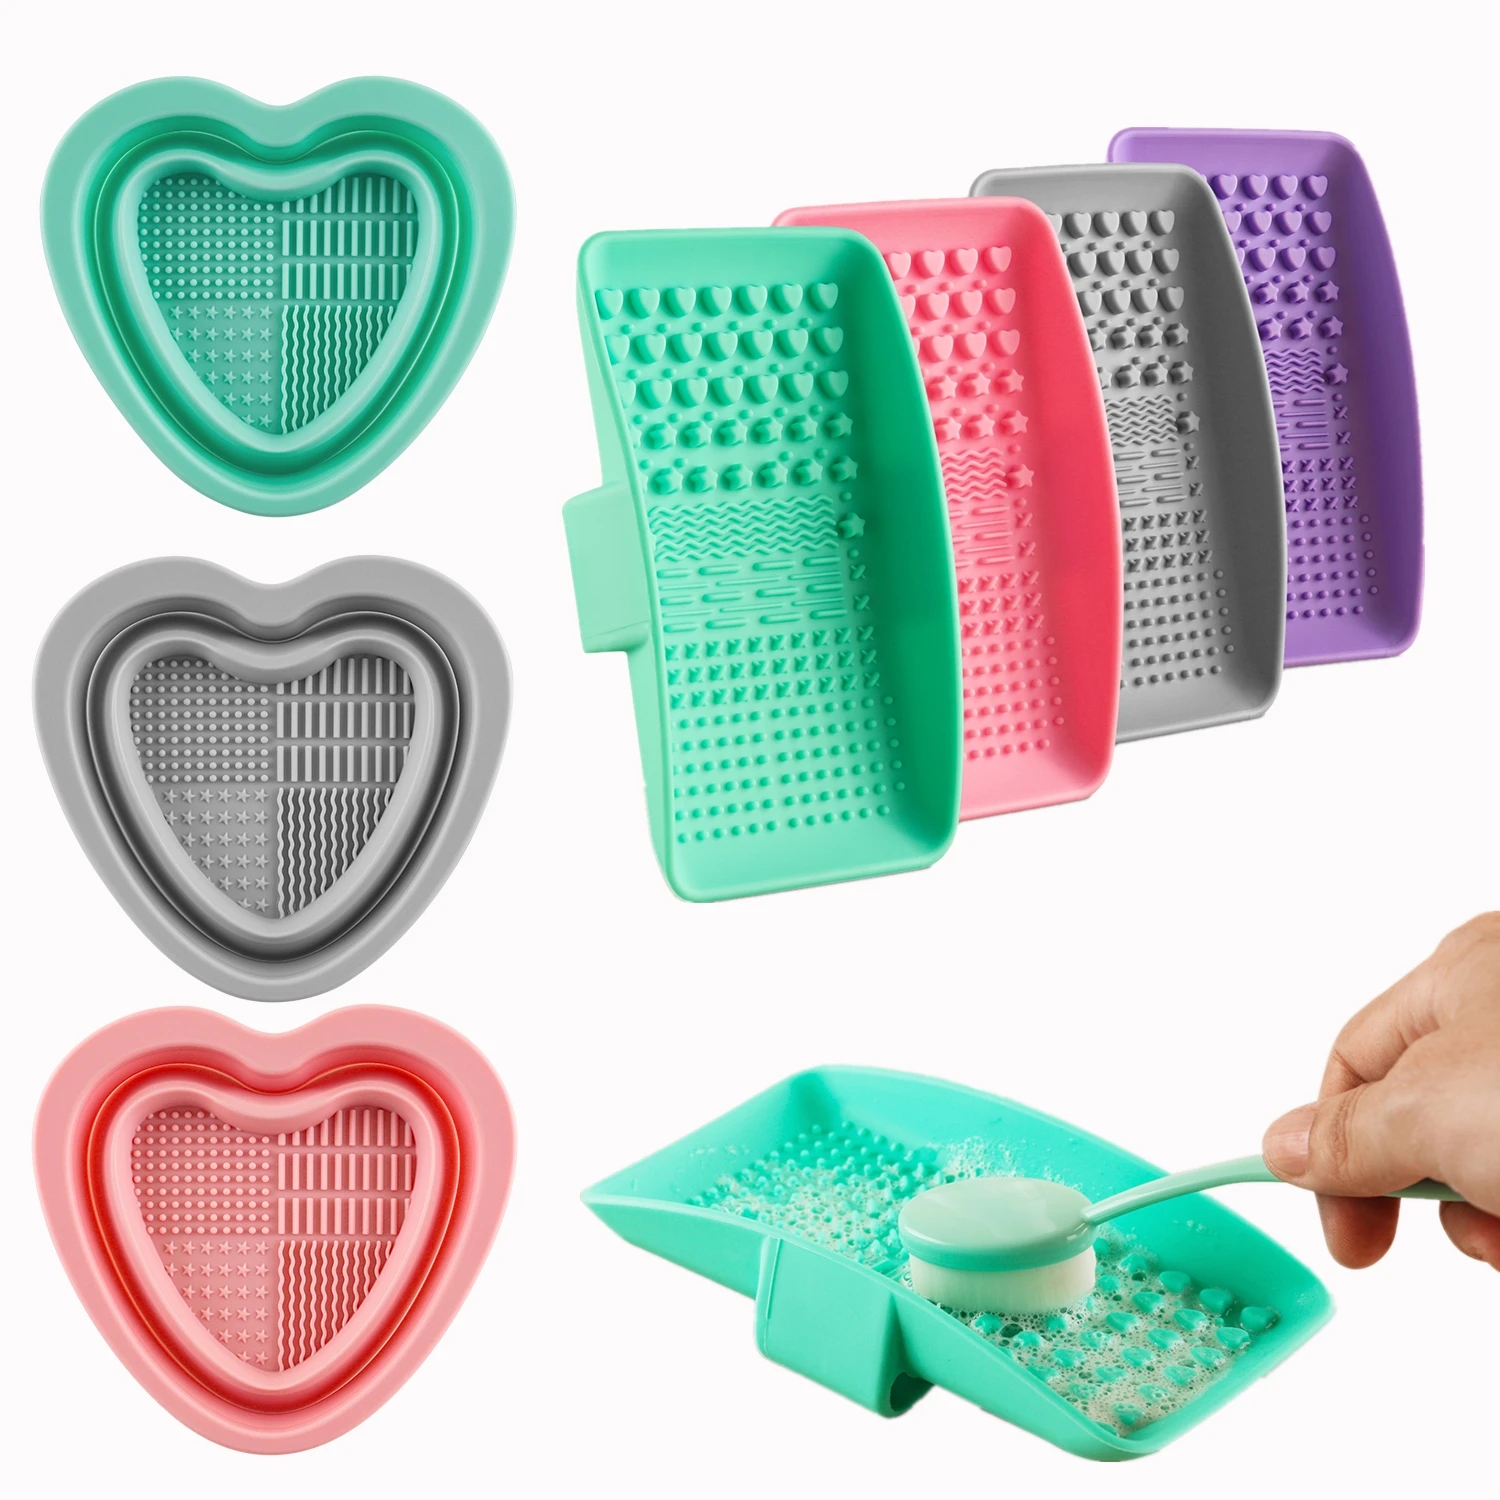 Handheld Silicone Brush Scrubber / Foldable Brush Cleaning Bowl Mat To Clean Blender Brushes A Lot Easier Brush Cleaning Palette